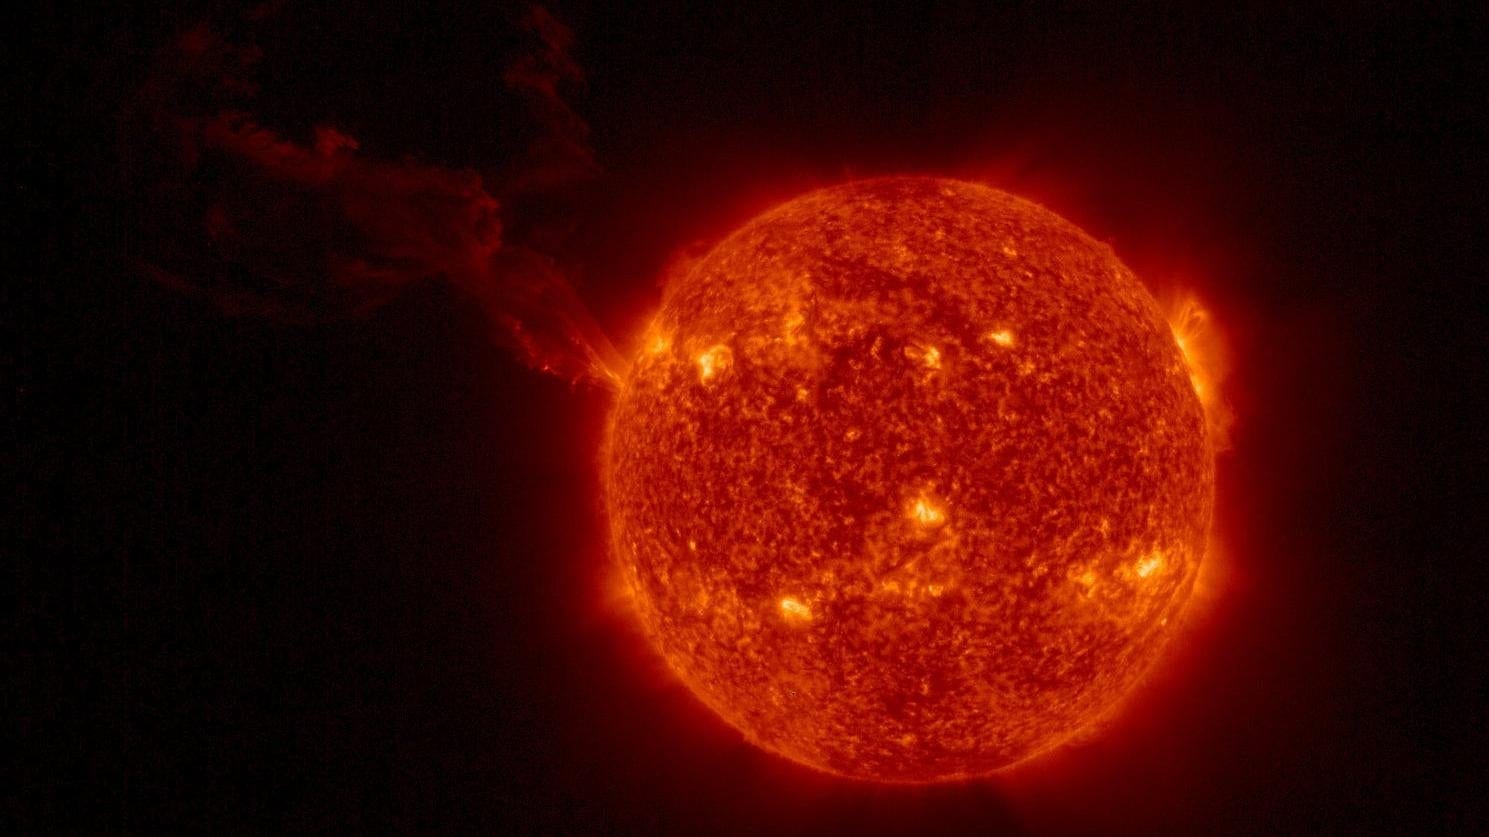 storm danger posed by fresh Mclass solar flare! CME likely